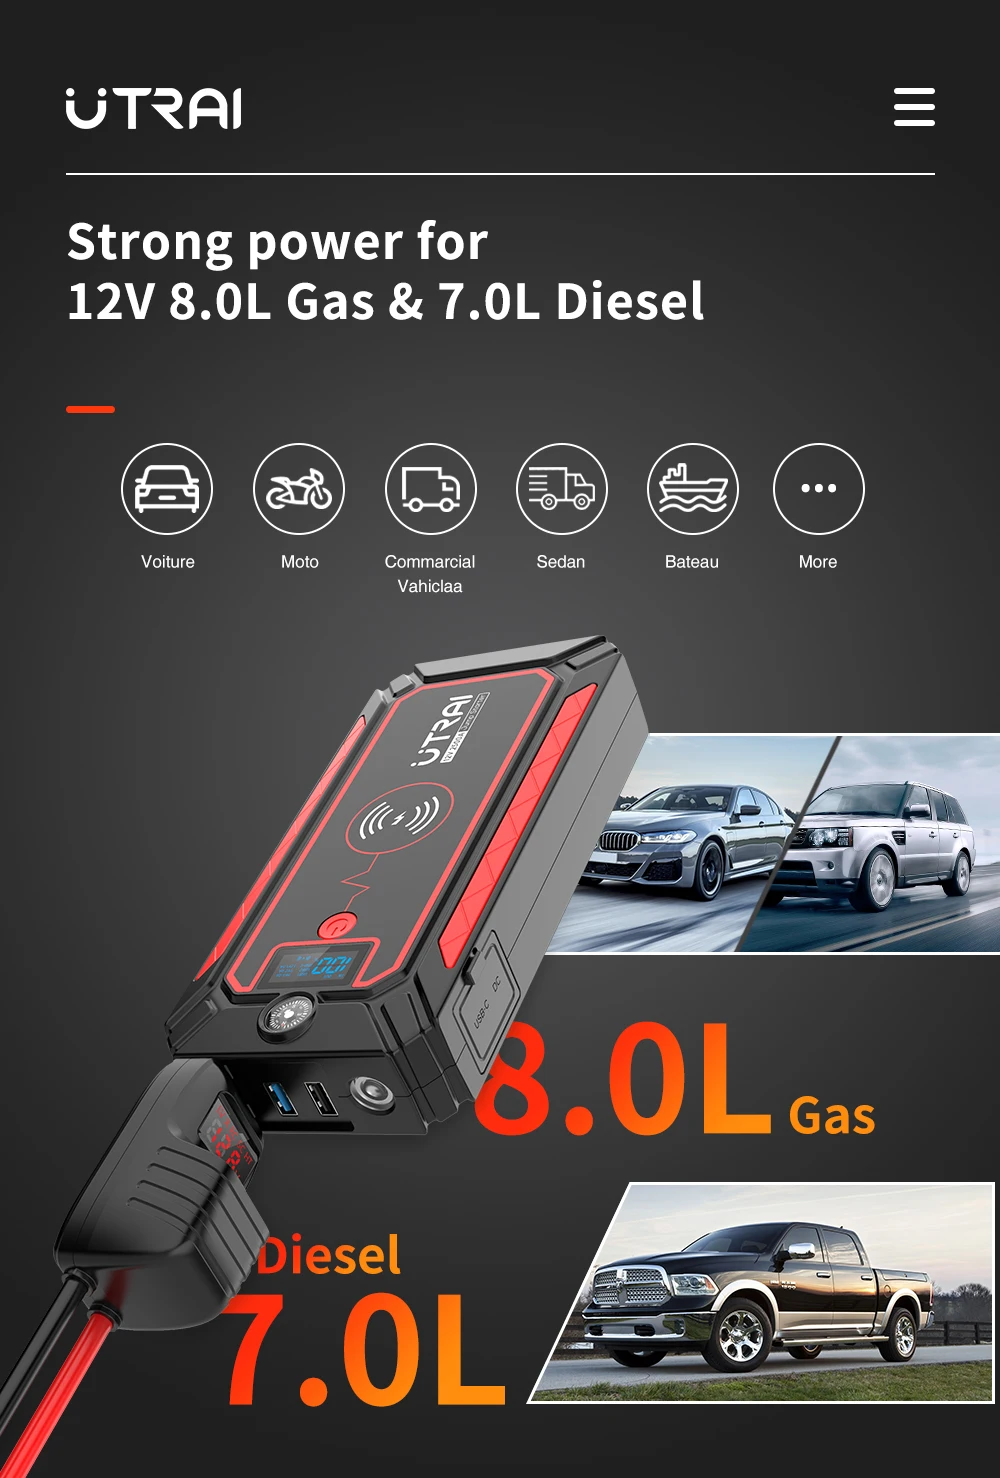 car jump starter 24000mah 2500a jstar 4 battery booster starting device wireless portable power bank charger for vehicle free global shipping